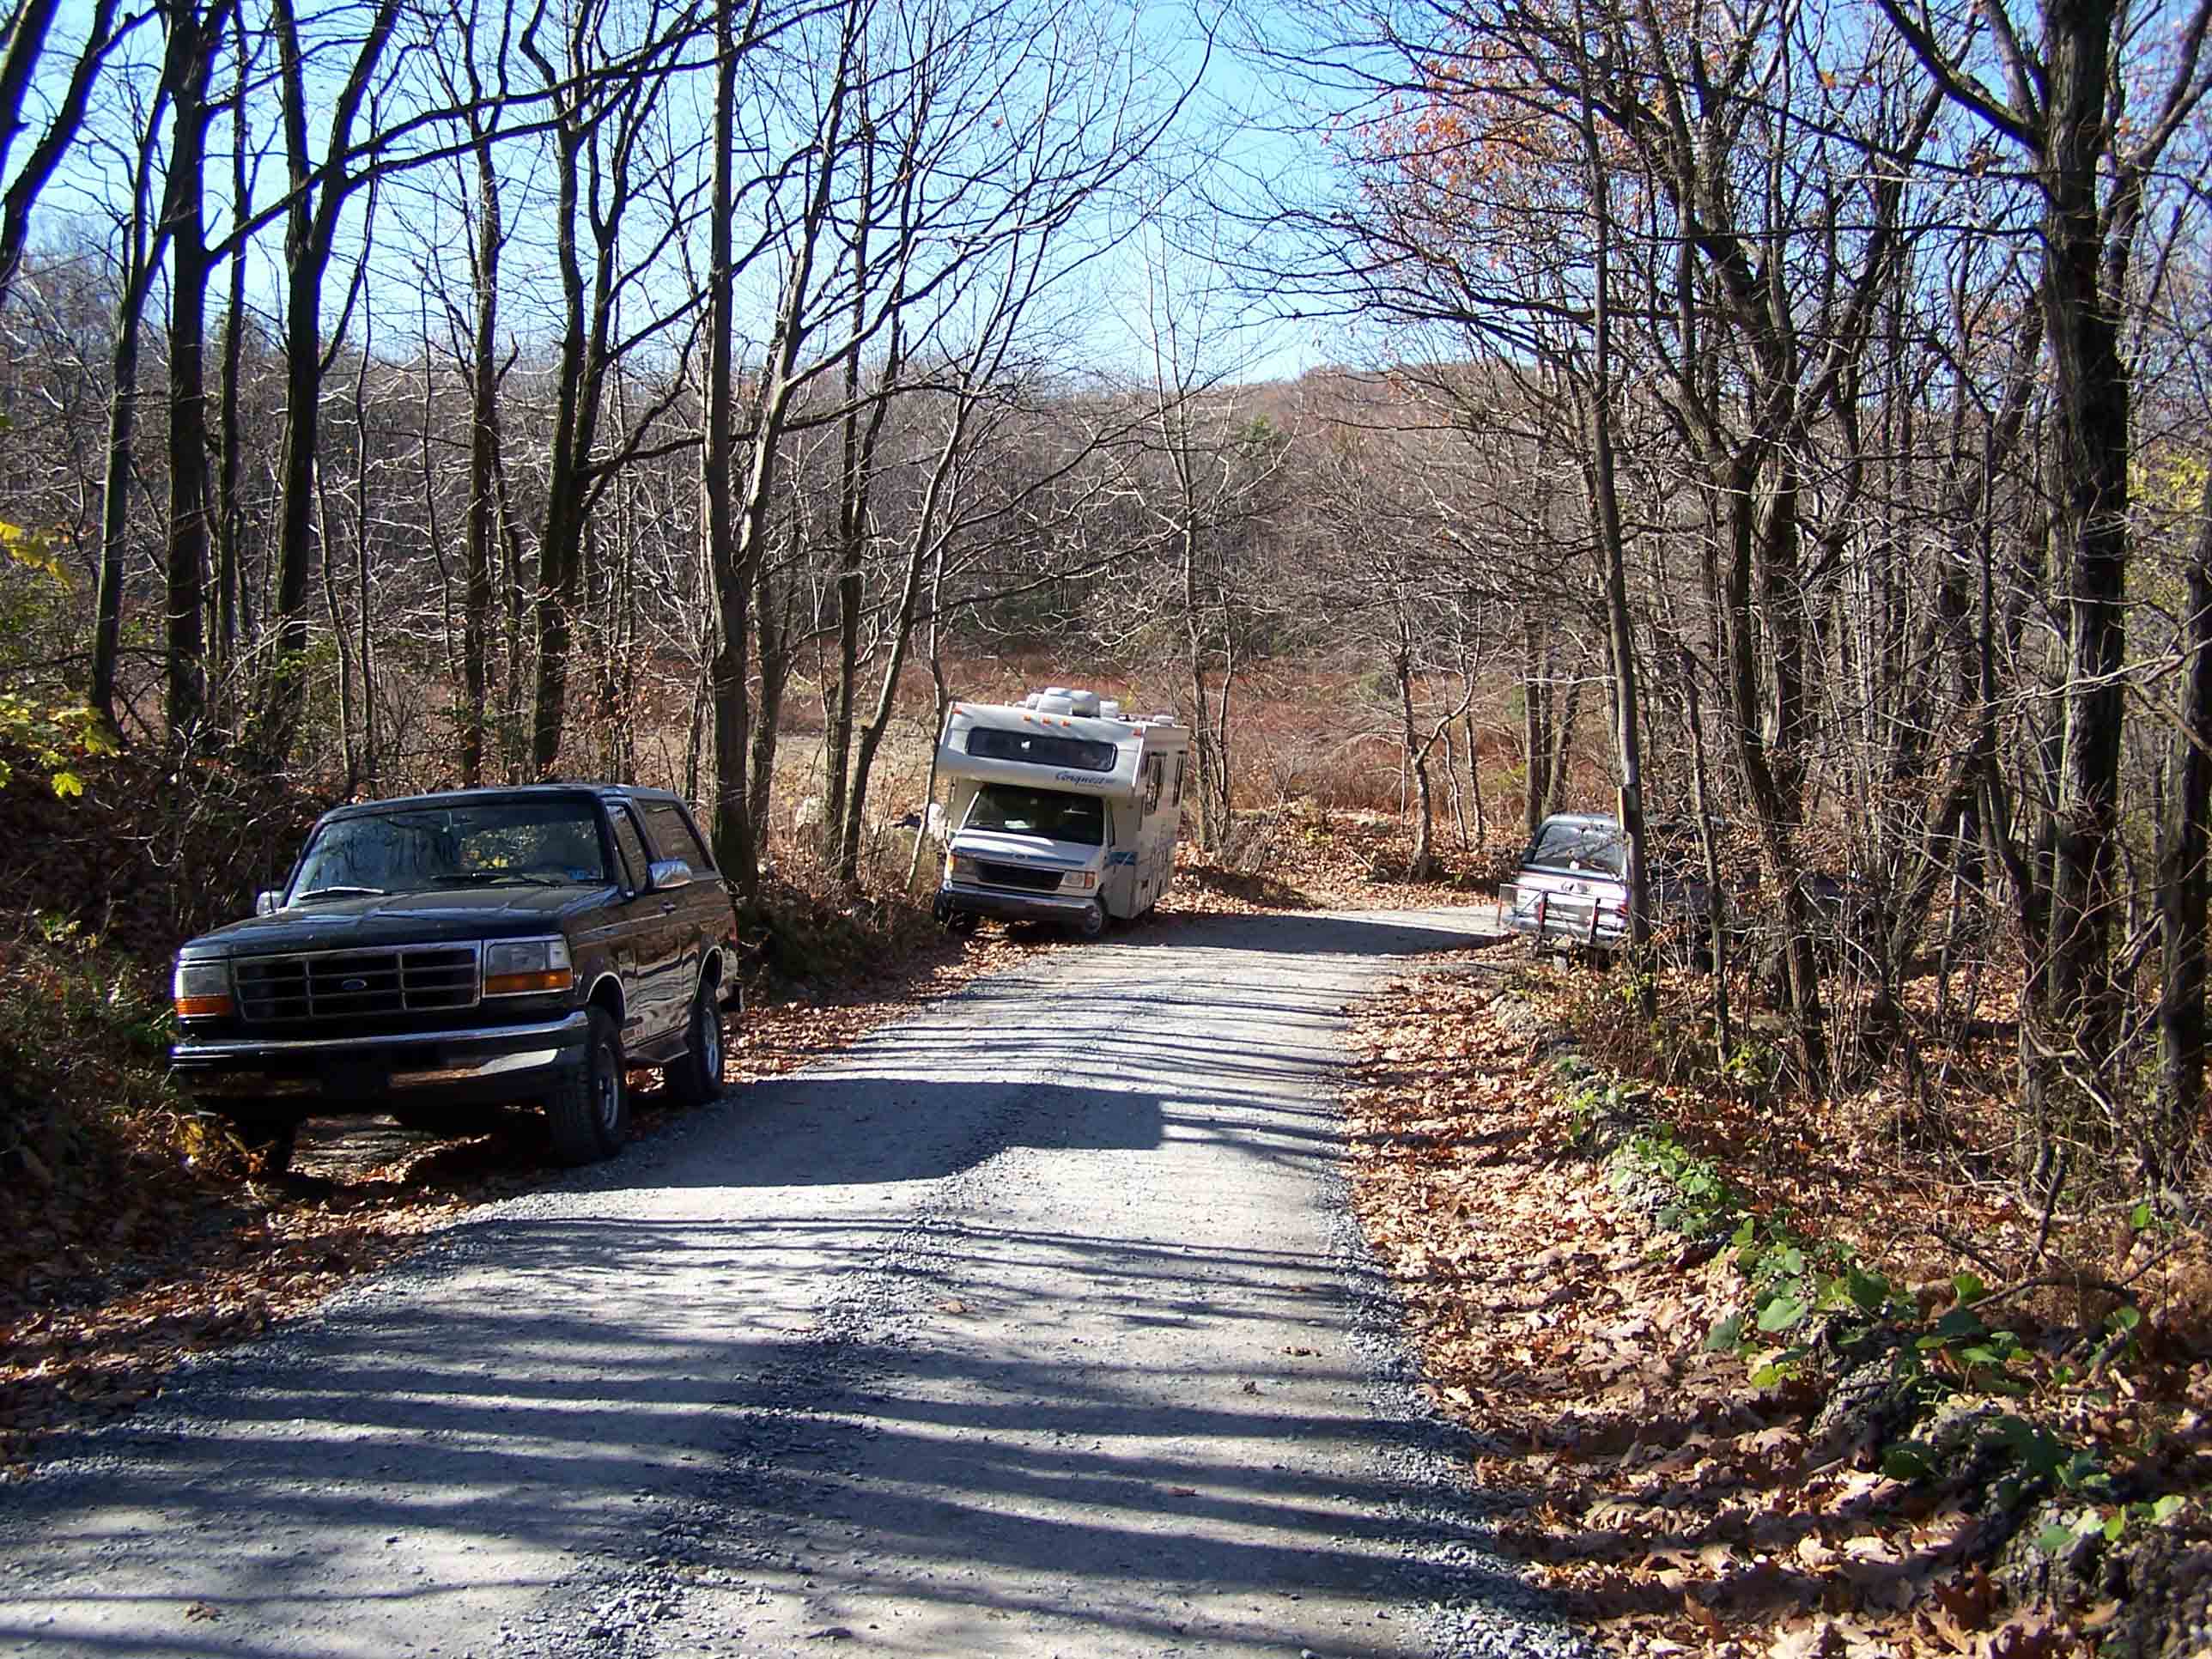 mm 5.0 - Parking on Blue Mountain/Ashfield Road. The AT used to follow Ashfield Road 0.2 miles. Southbound the trail went left just past where the RV is parked and started to follow a woods road. Due to a recent relocation, the trail now crosses the road directly and skips the road walk. However the area shown in the picture is still viable parking.